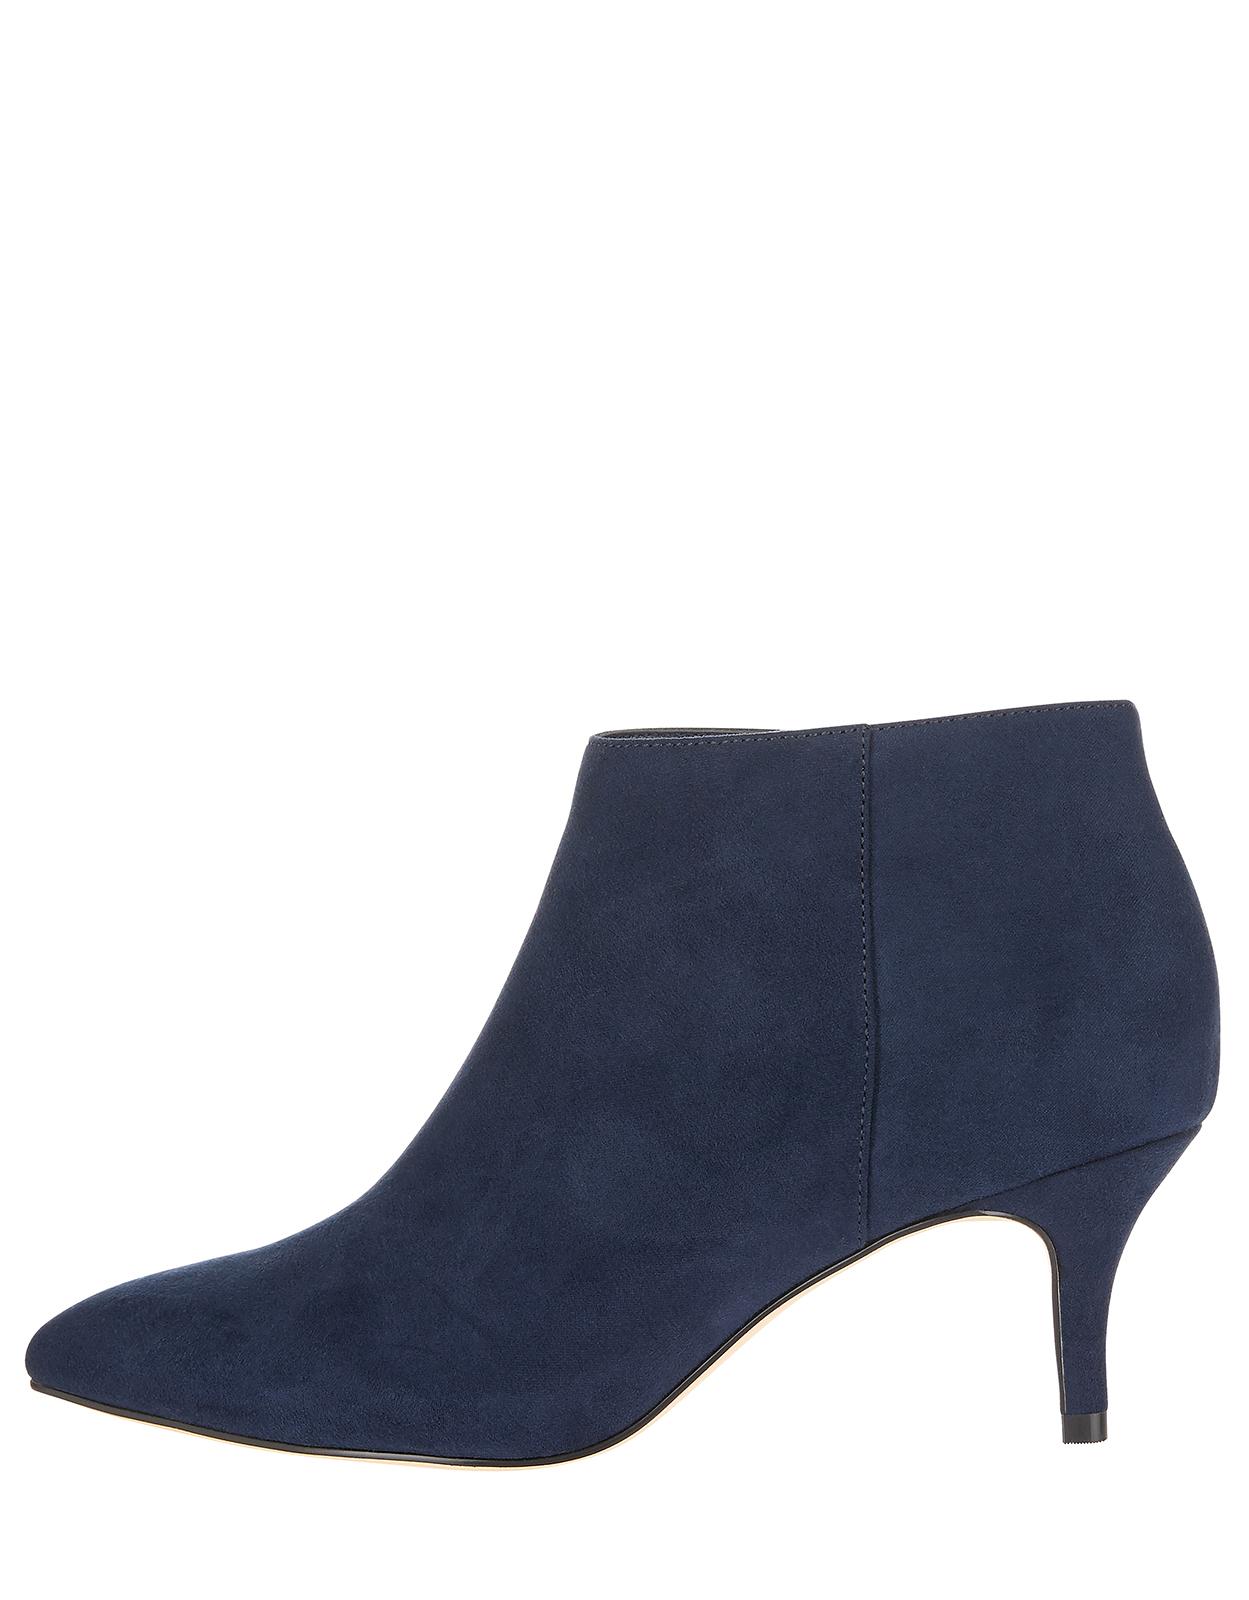 Monsoon Synthetic Kendall Pointed Kitten Heel Boots in Navy (Blue) - Lyst